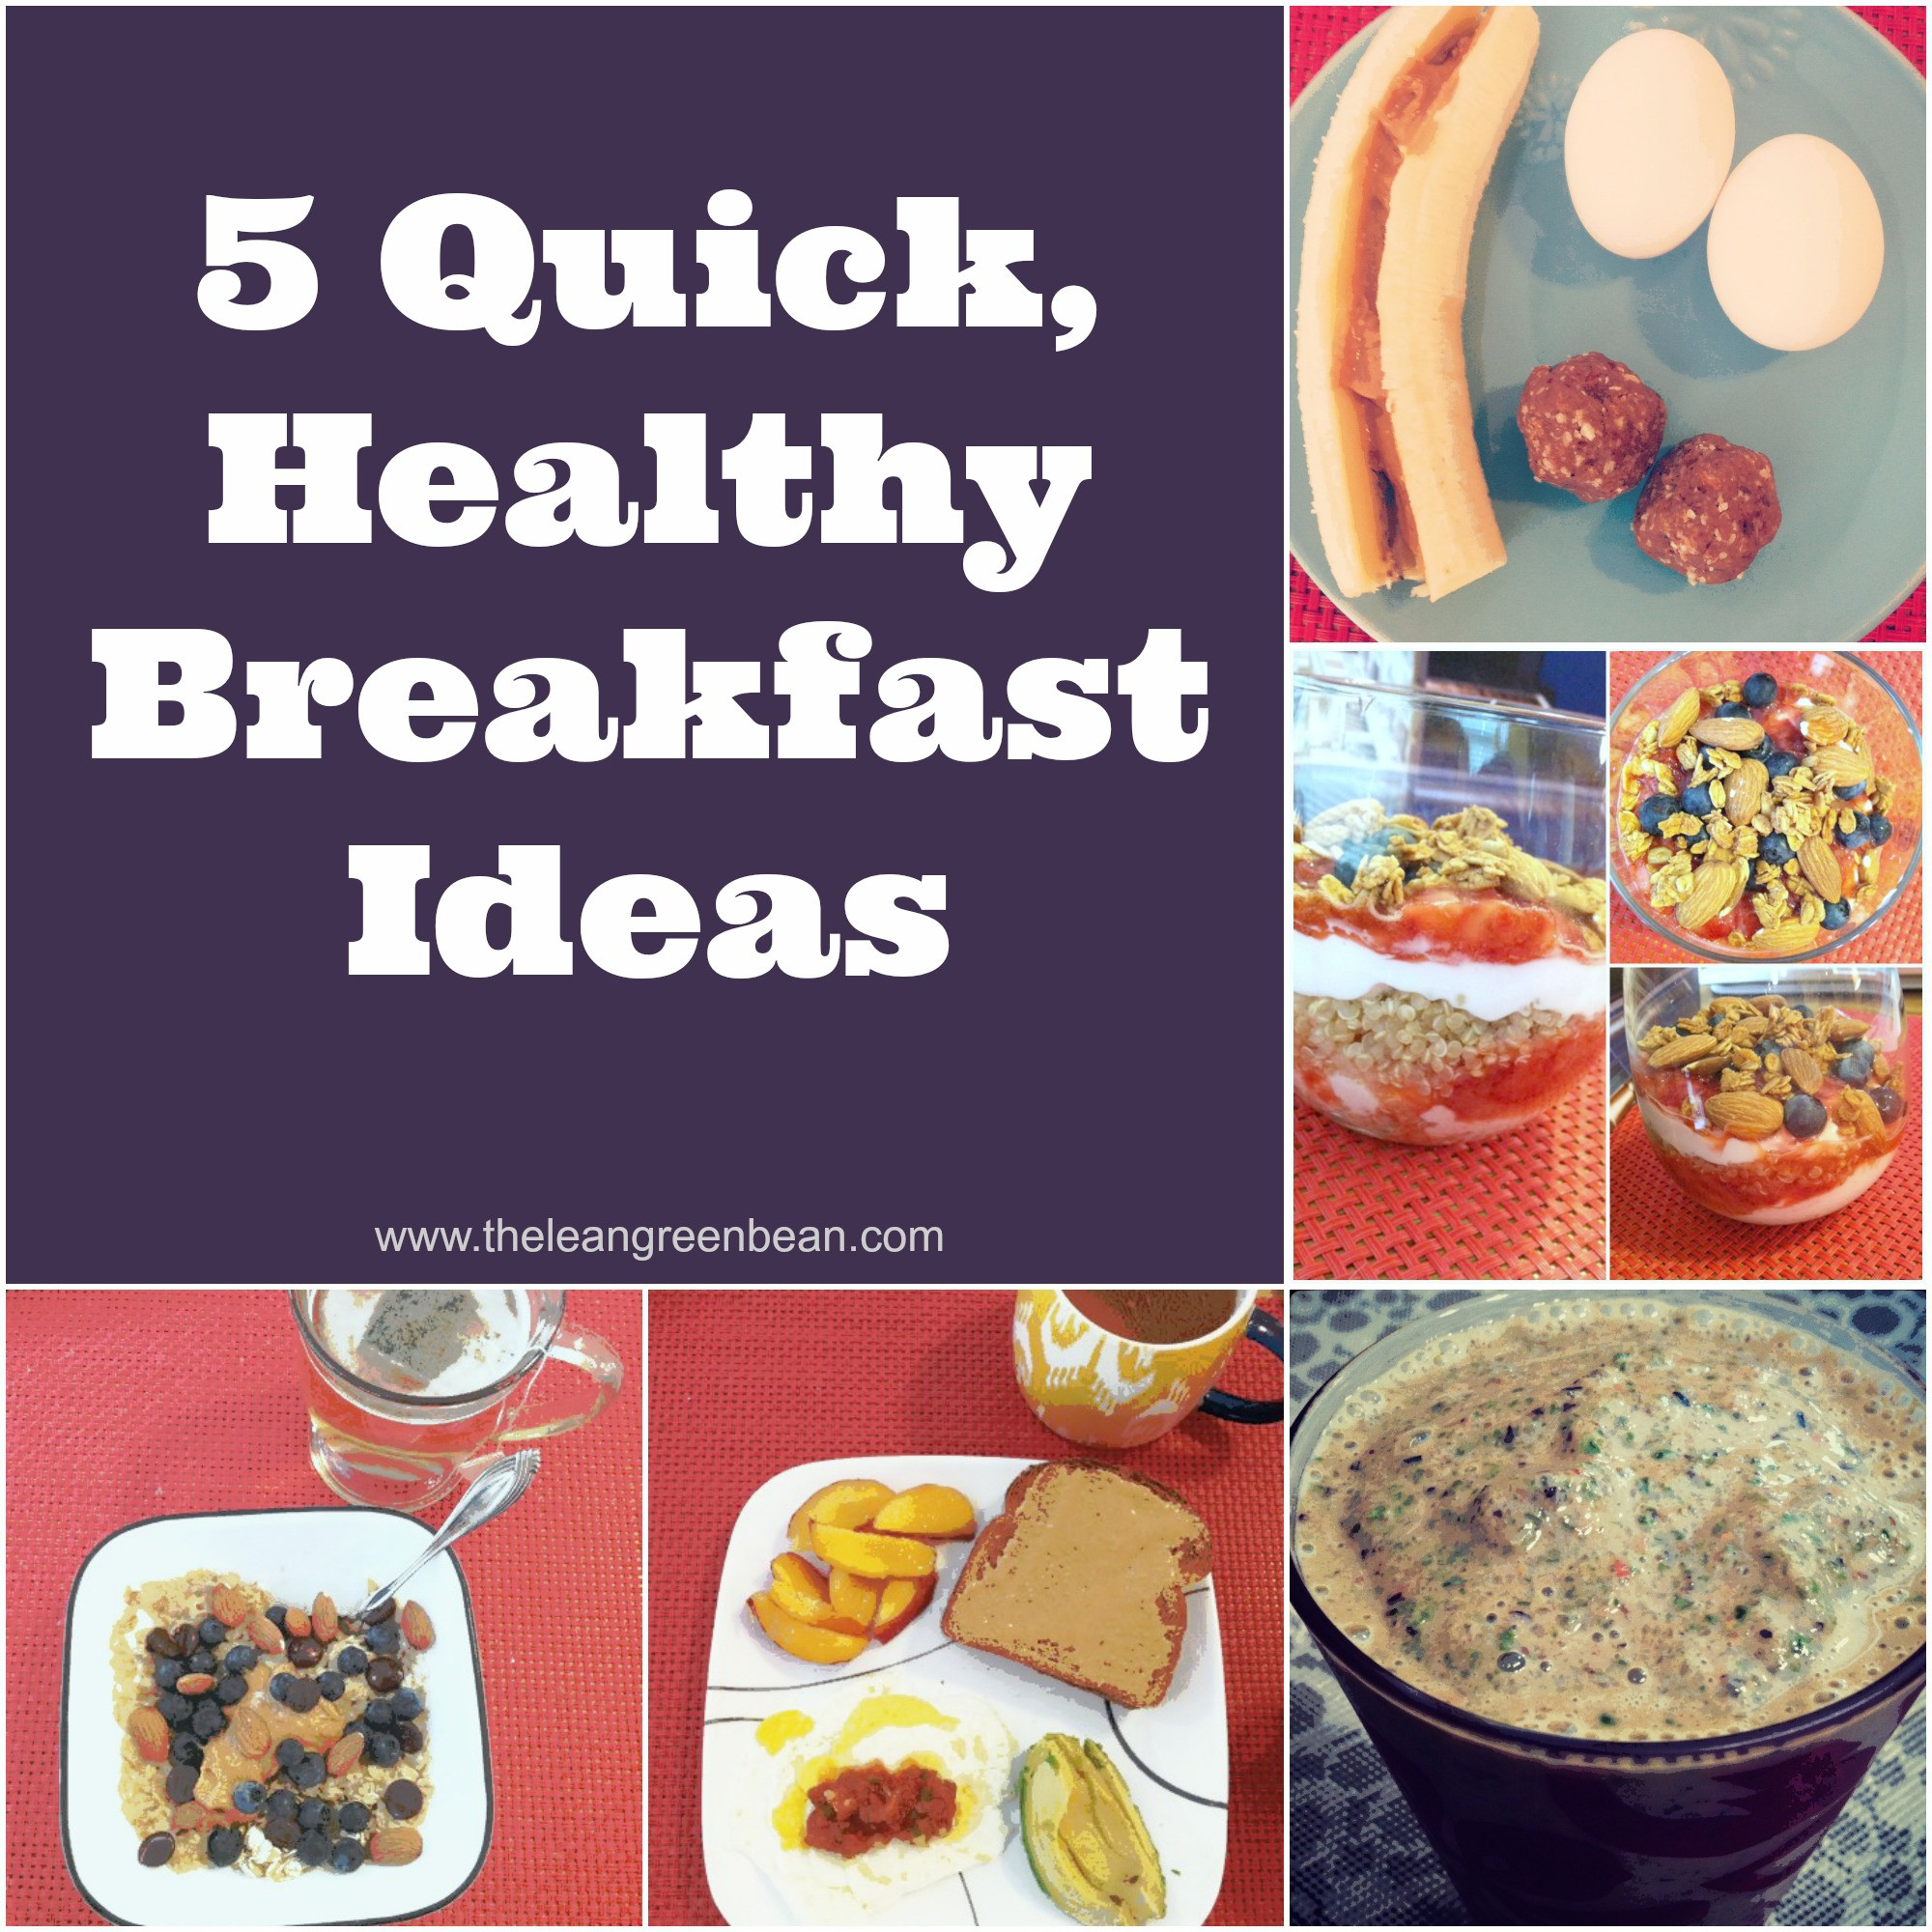 Quick And Easy Healthy Breakfast Ideas
 5 Quick Healthy Breakfast Ideas from a Registered Dietitian